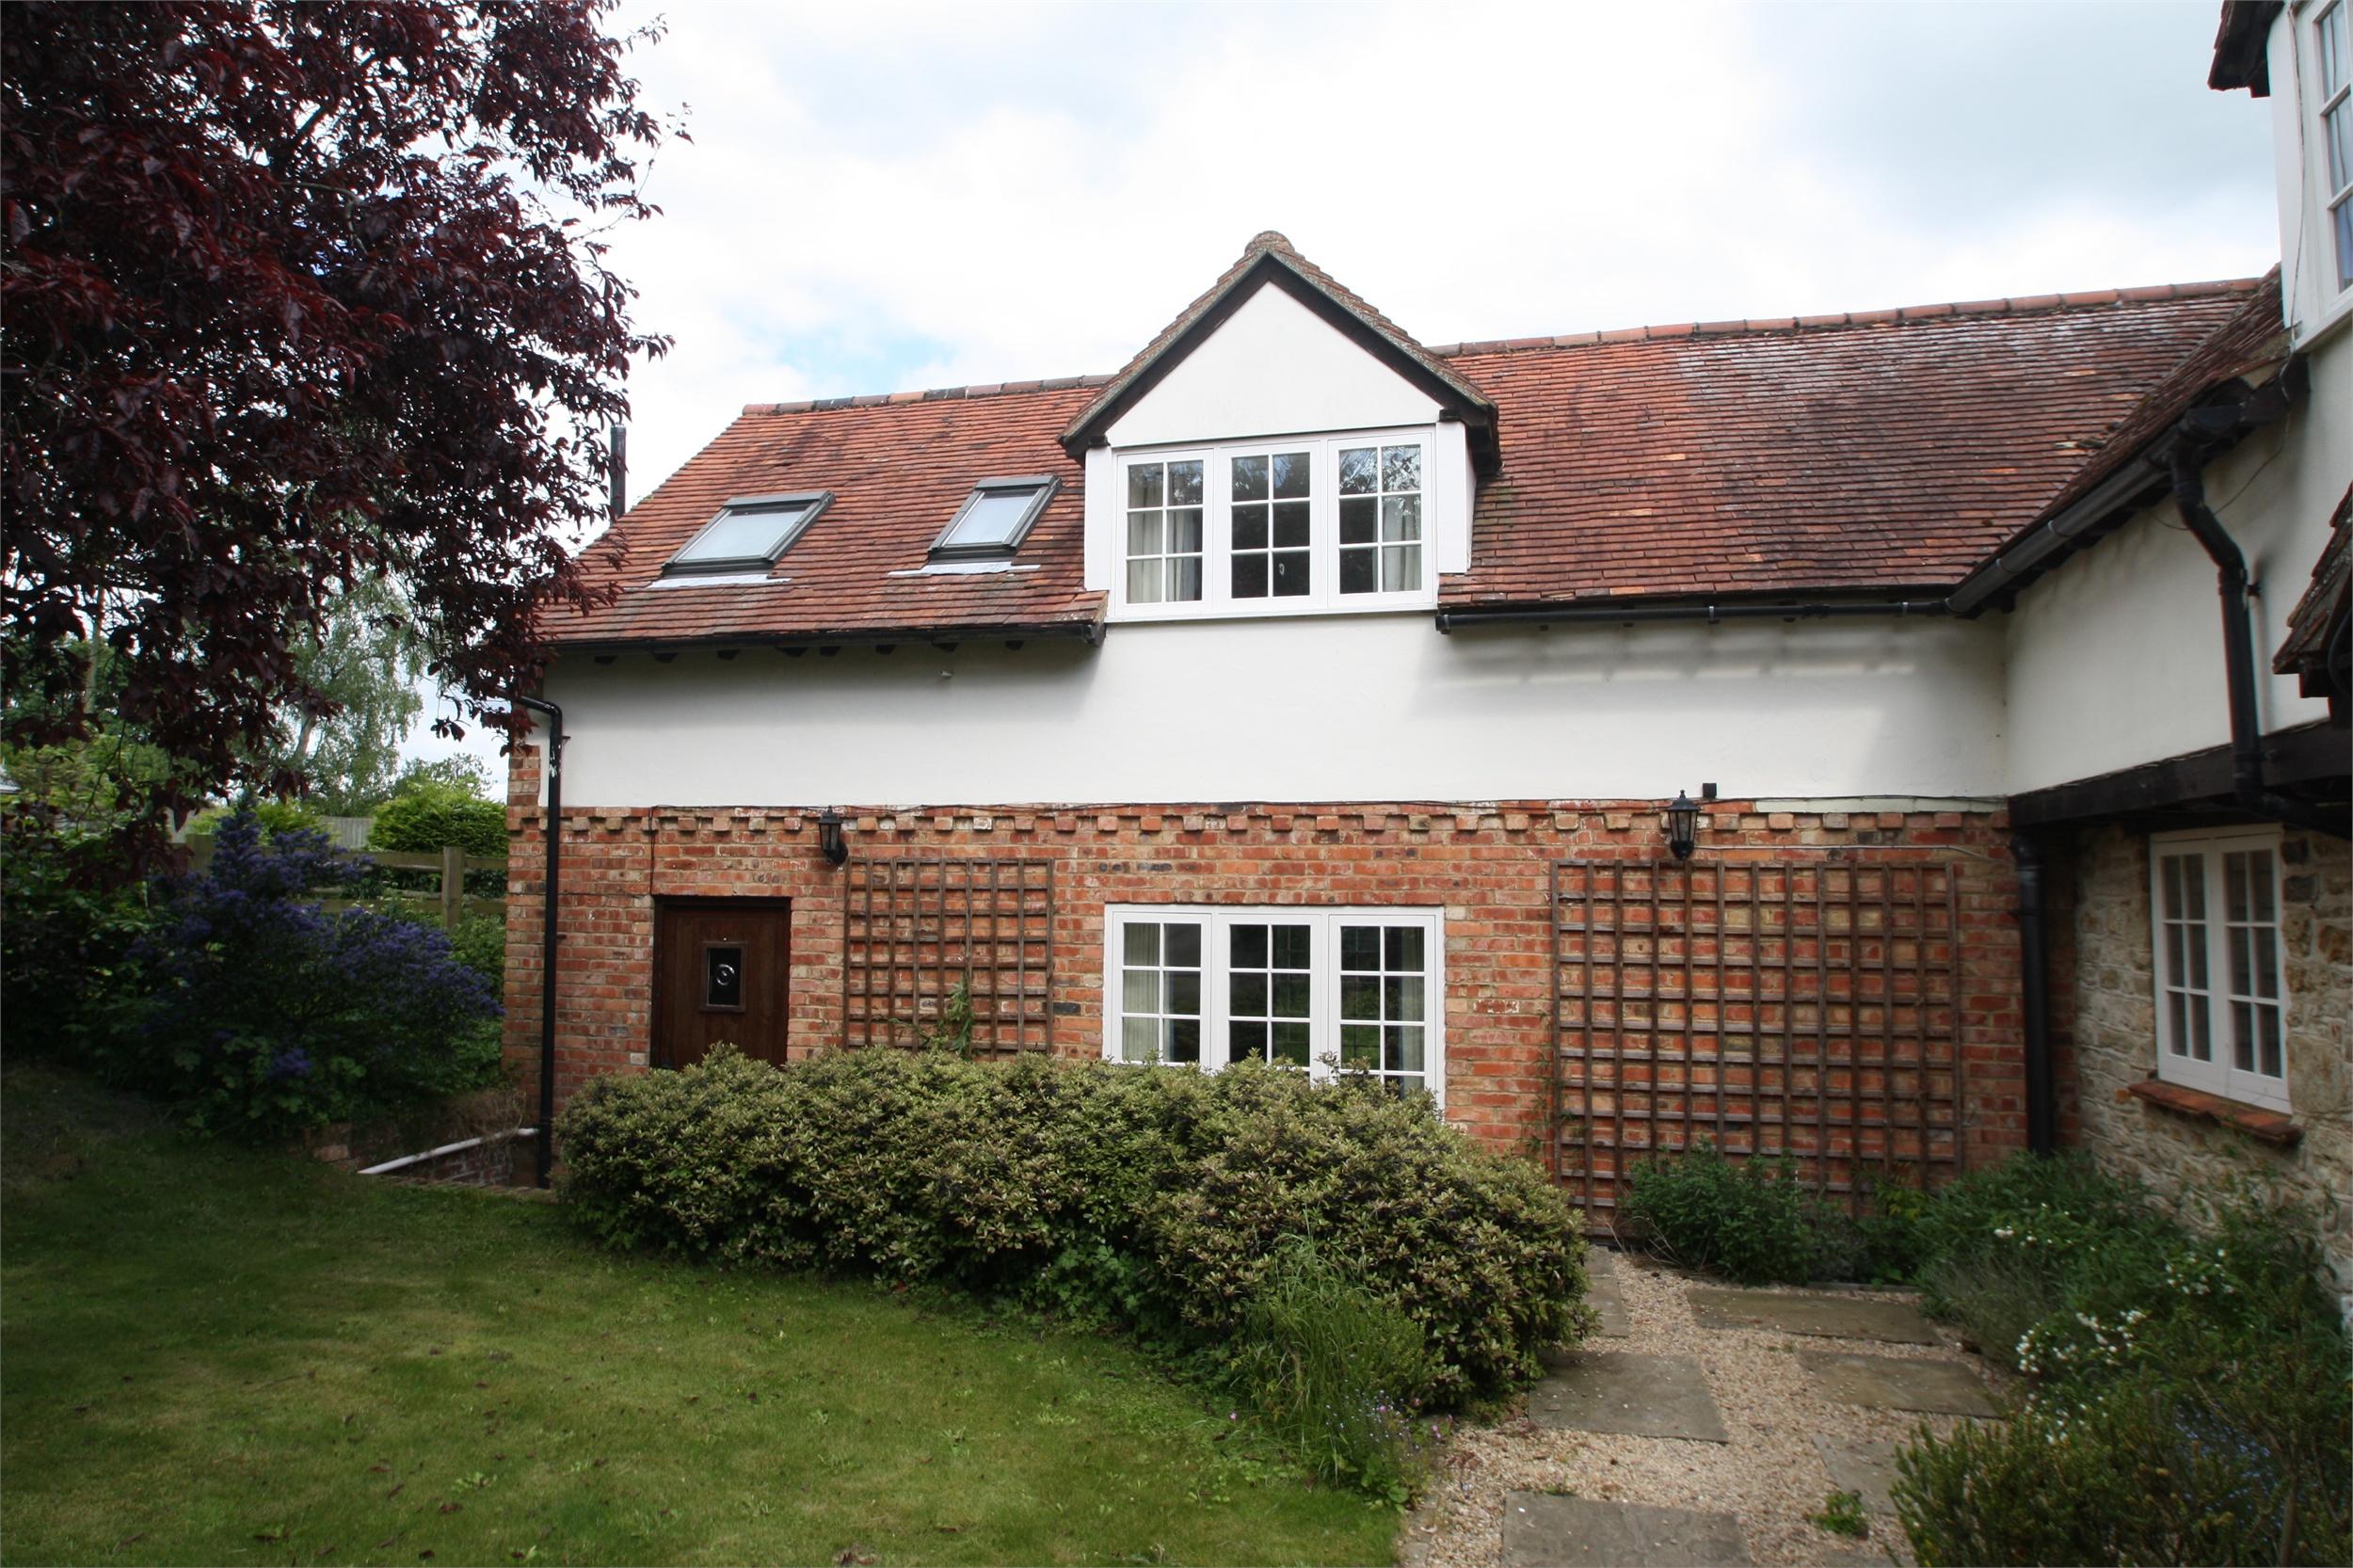 Parkers Thame 1 Bedroom House Let Agreed In Lower End